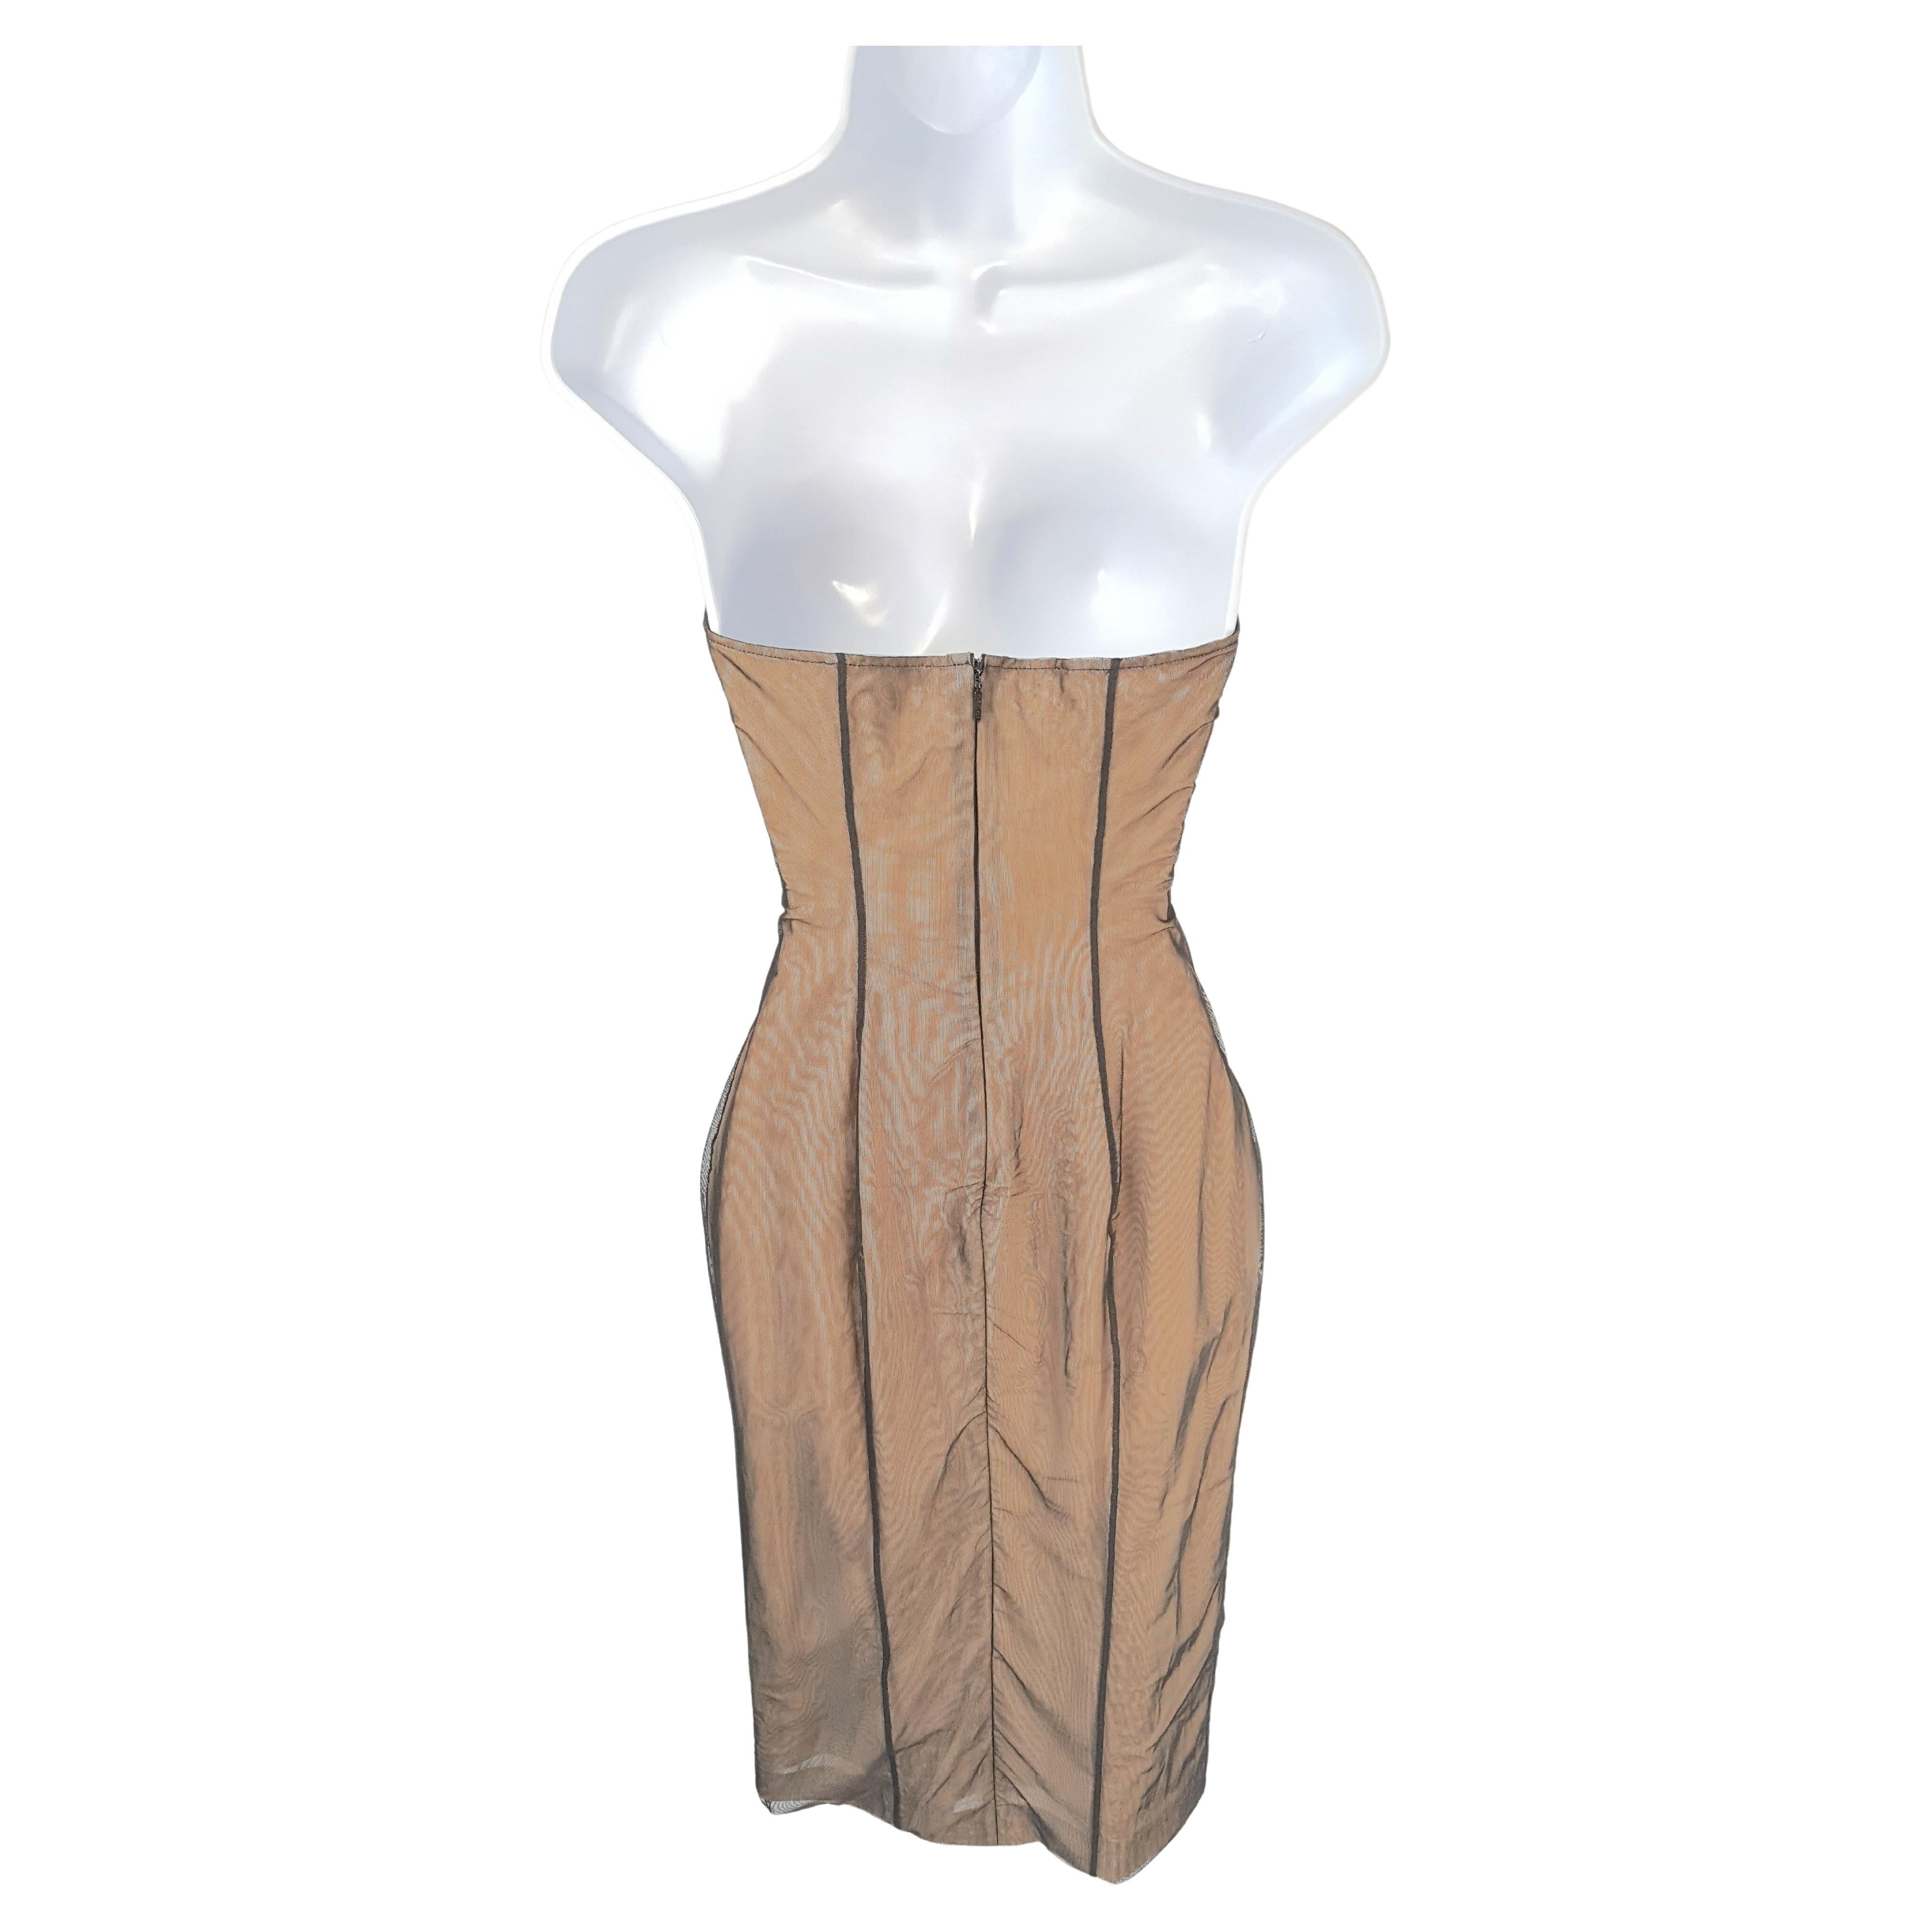 Gucci TomFord 2001 AwardYear RunwayLook2 Balconette Corset Strapless Nude Dress For Sale 3